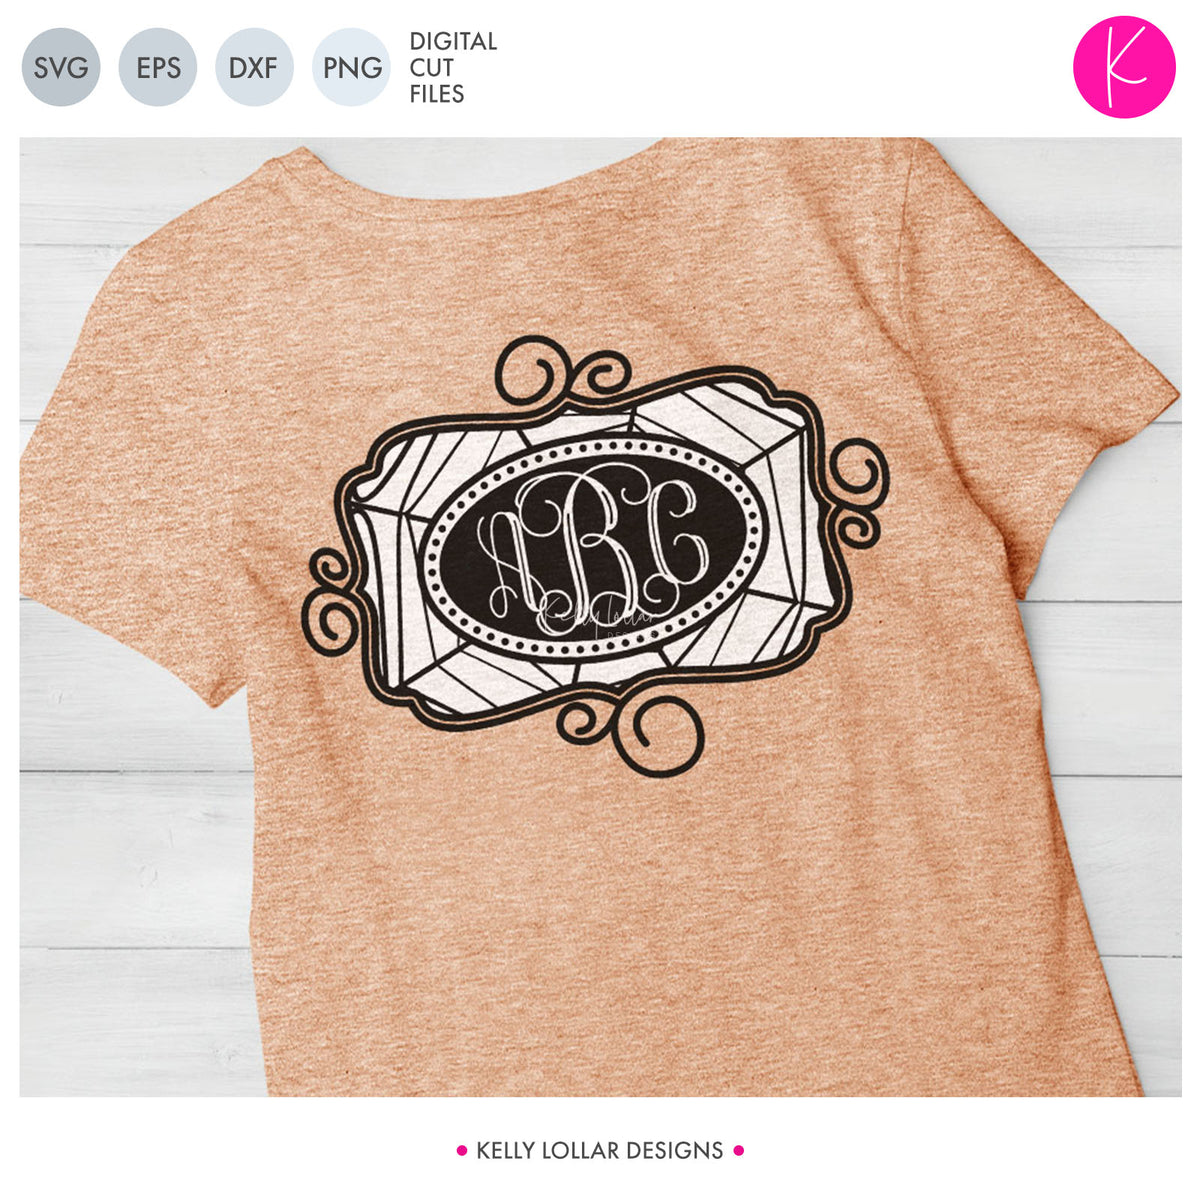 Web Oval Monogram | SVG DXF EPS PNG Cut Files